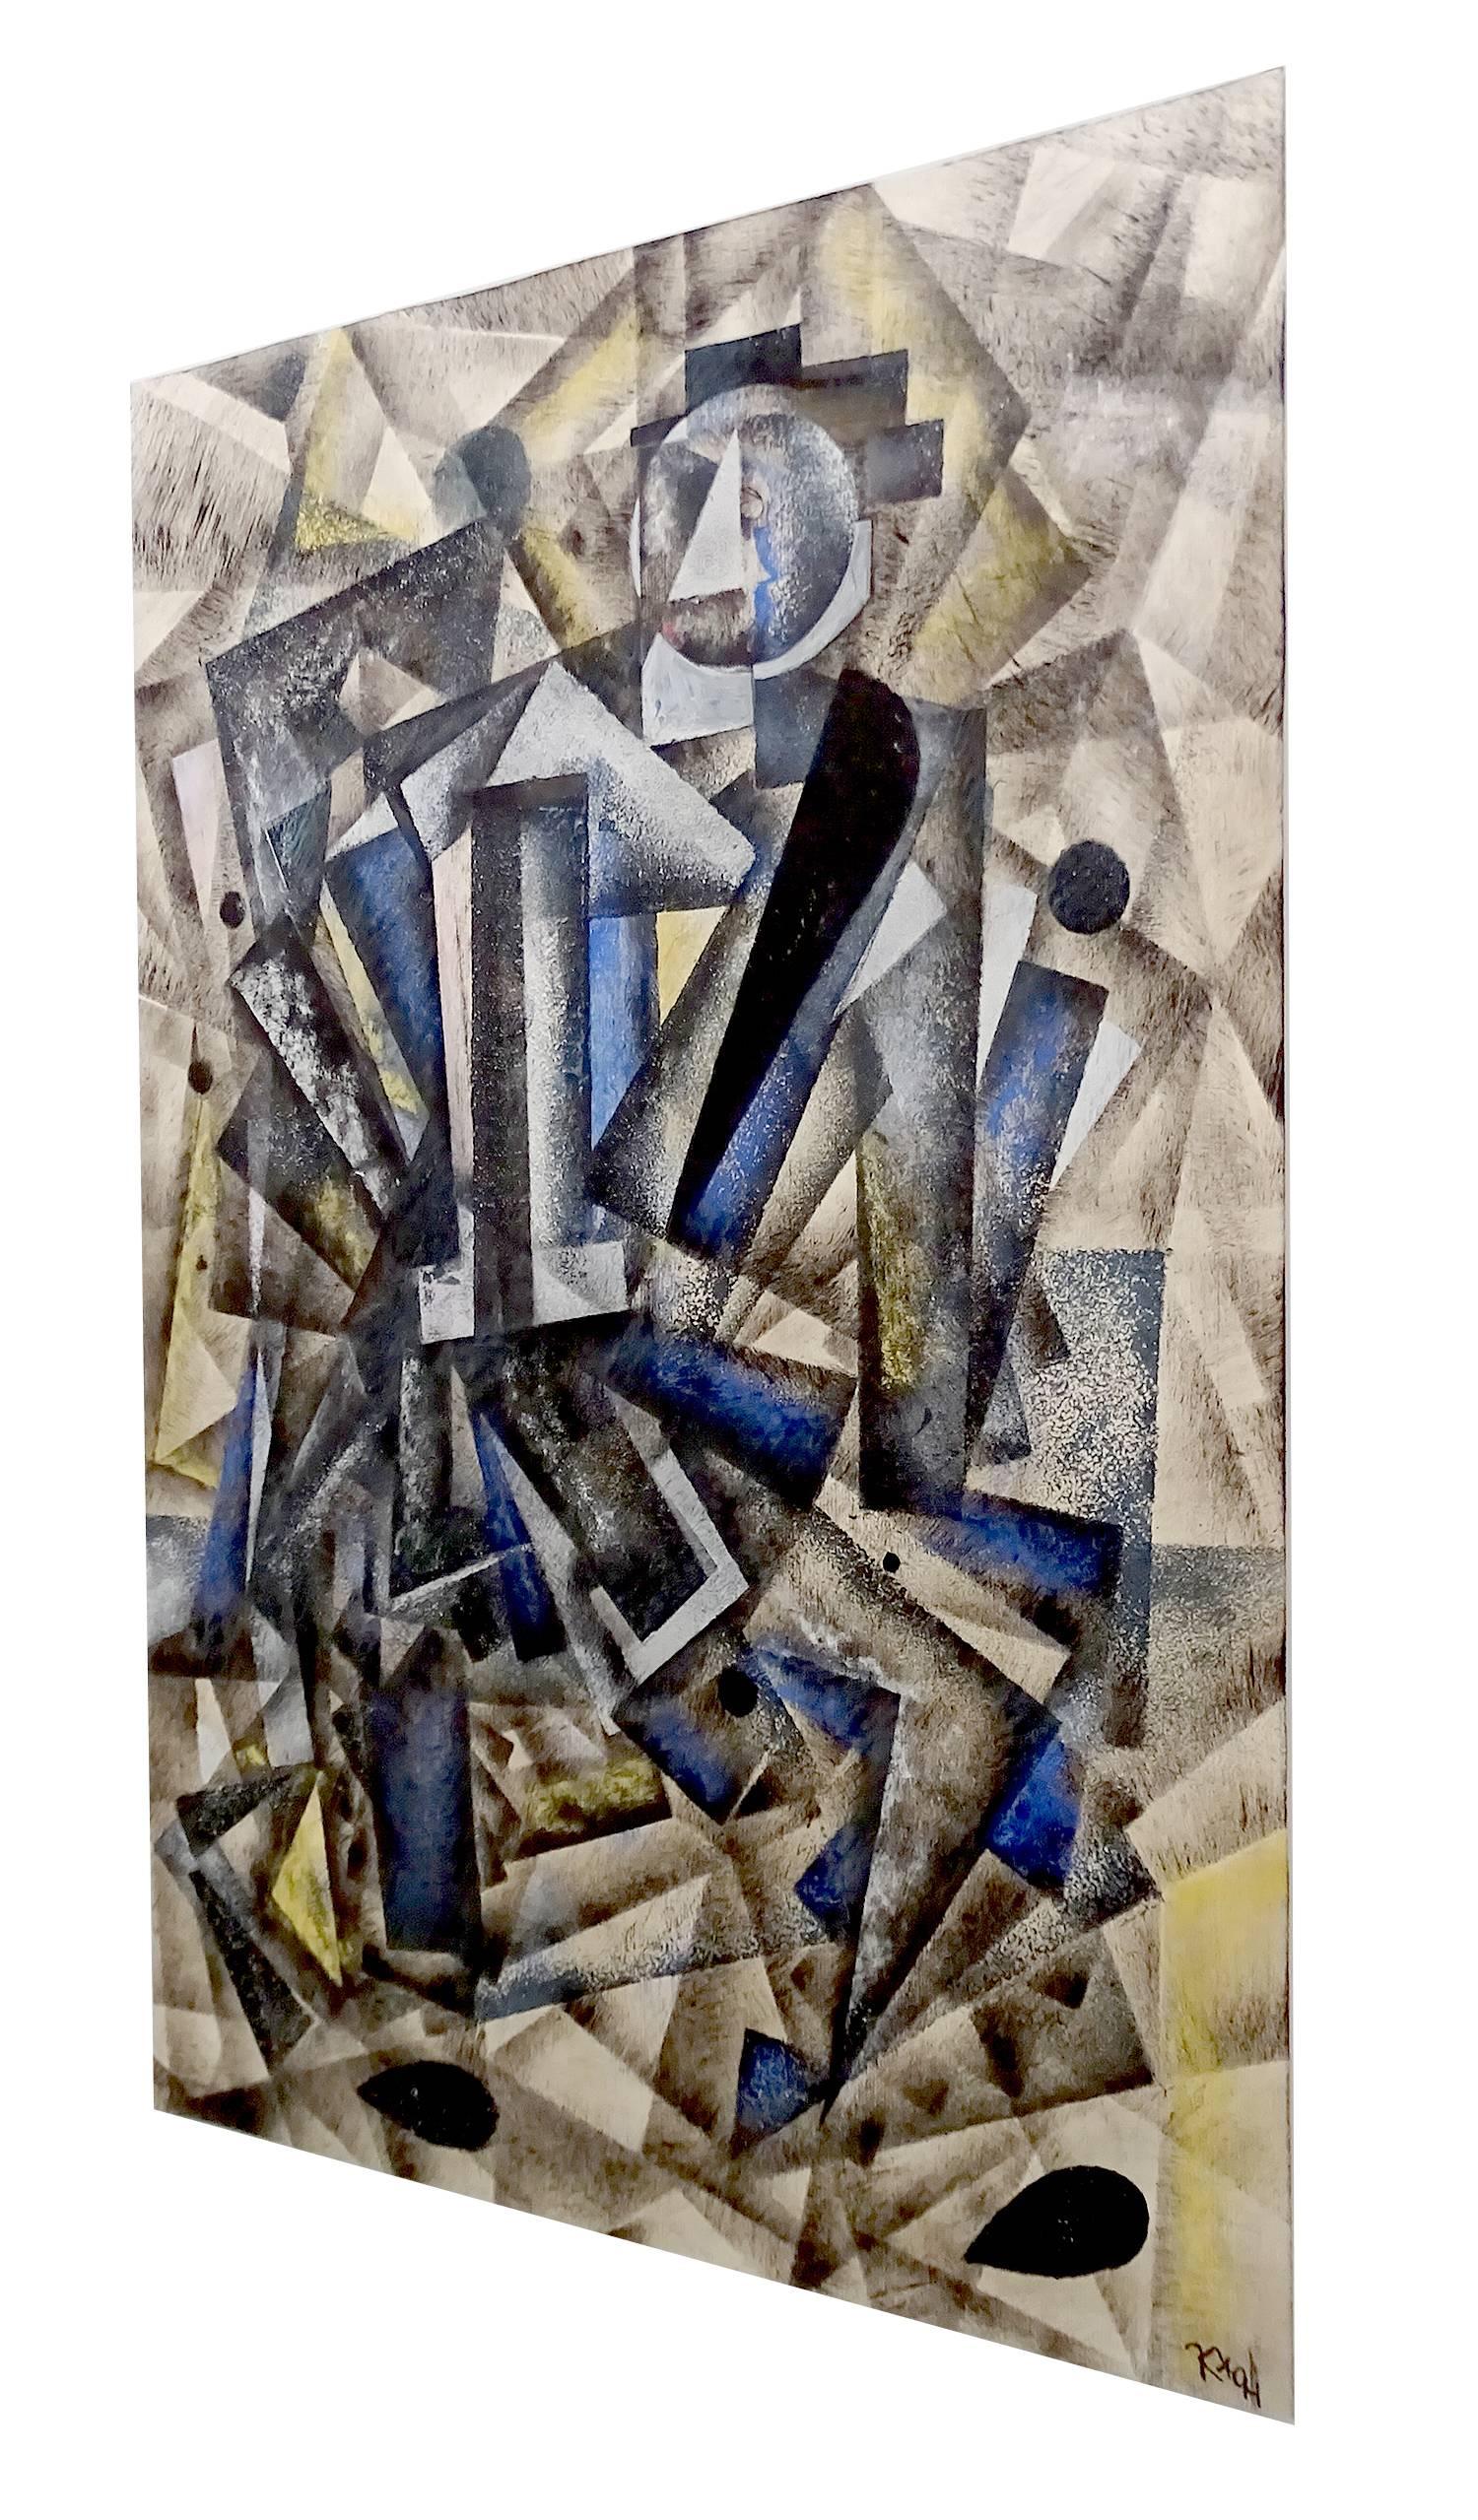 Stunning Avant Garde painting in the style of Marcel Duchamps and russian painters of the 1910s-1920s (Malevich, Rodchenko, Popova) but probably from a later period (1950s, 1960s) featuring a human figure in different superimposed static positions